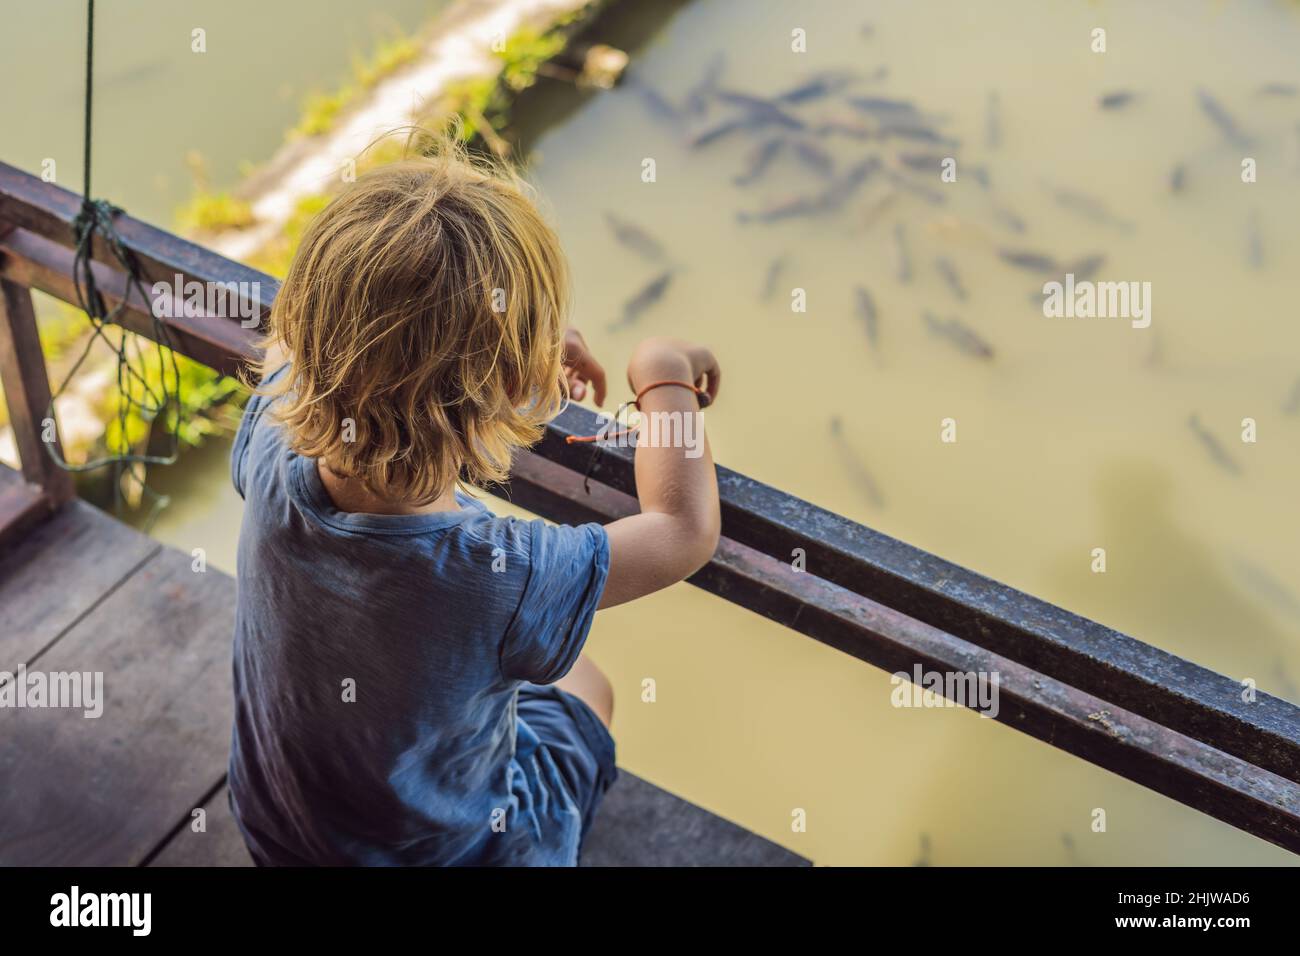 Kids And Fish Pond: Over 5,619 Royalty-Free Licensable Stock Photos